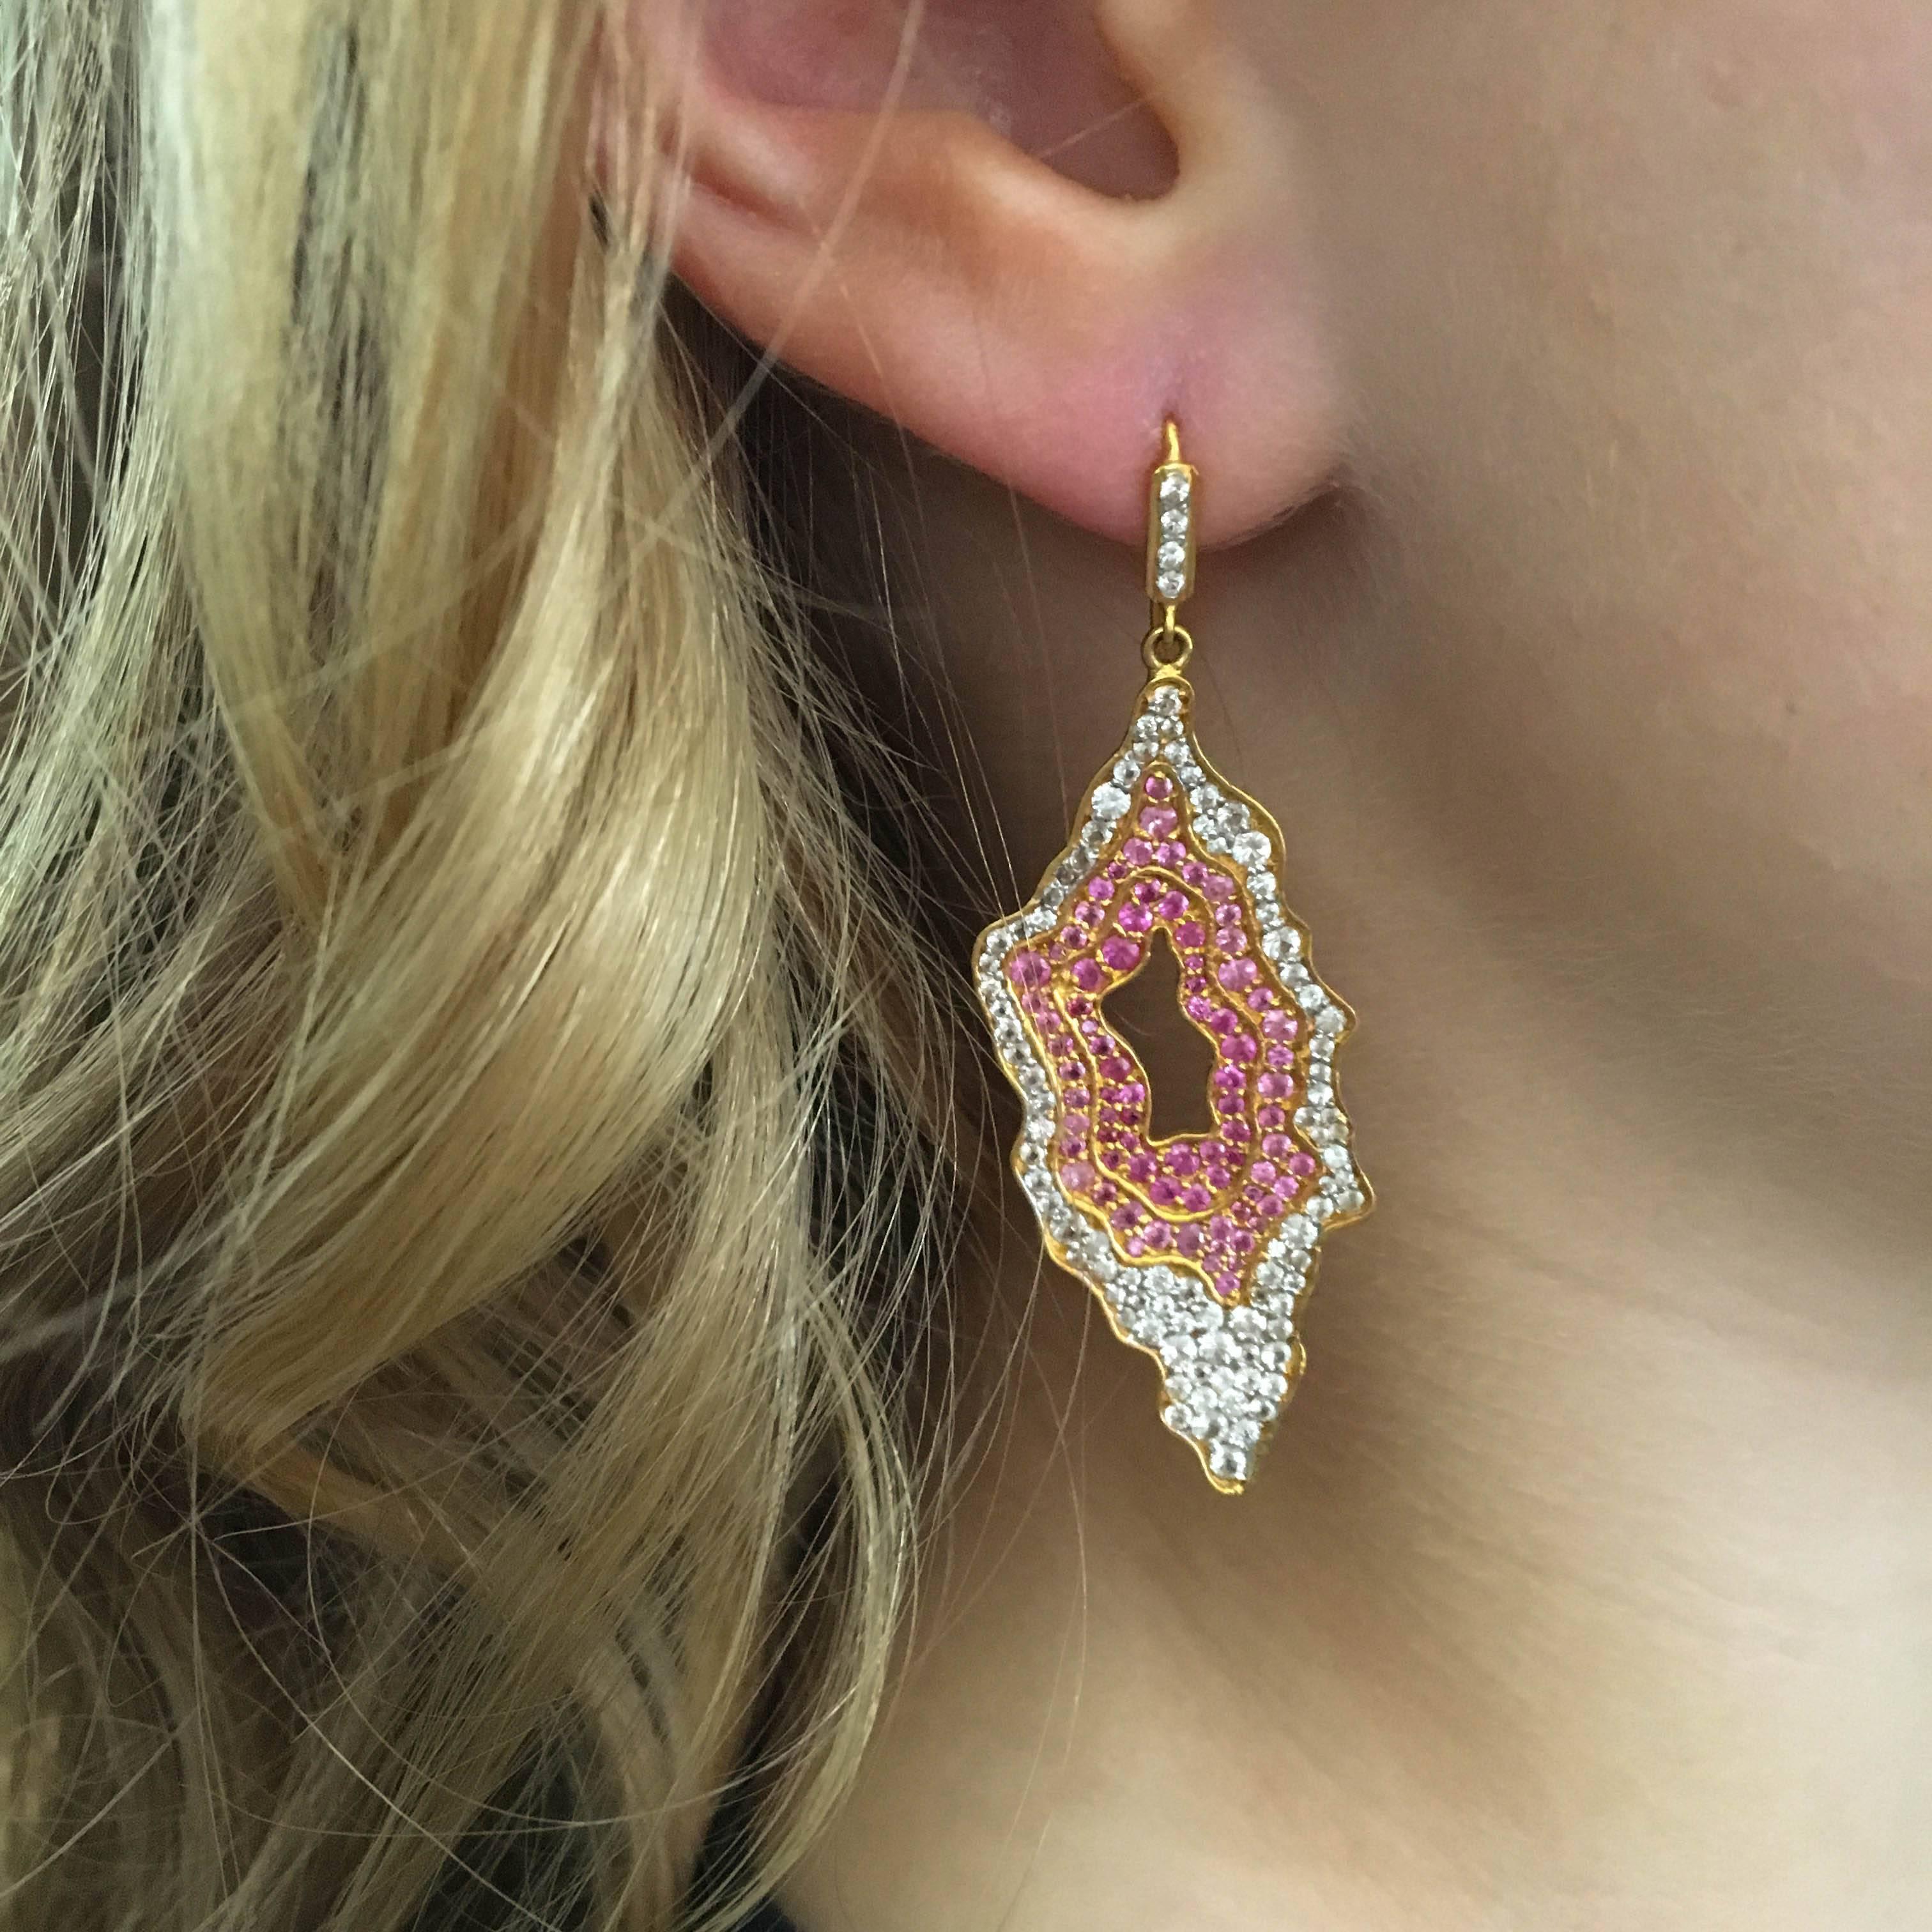 Designed to look like a sliced geodes but made out of pink and white sapphires, these earrings are spectacular and unique.  Lightweight on the ears.   Stand out in any crowd with these fabulous statement earrings.  Also available in Blue and White